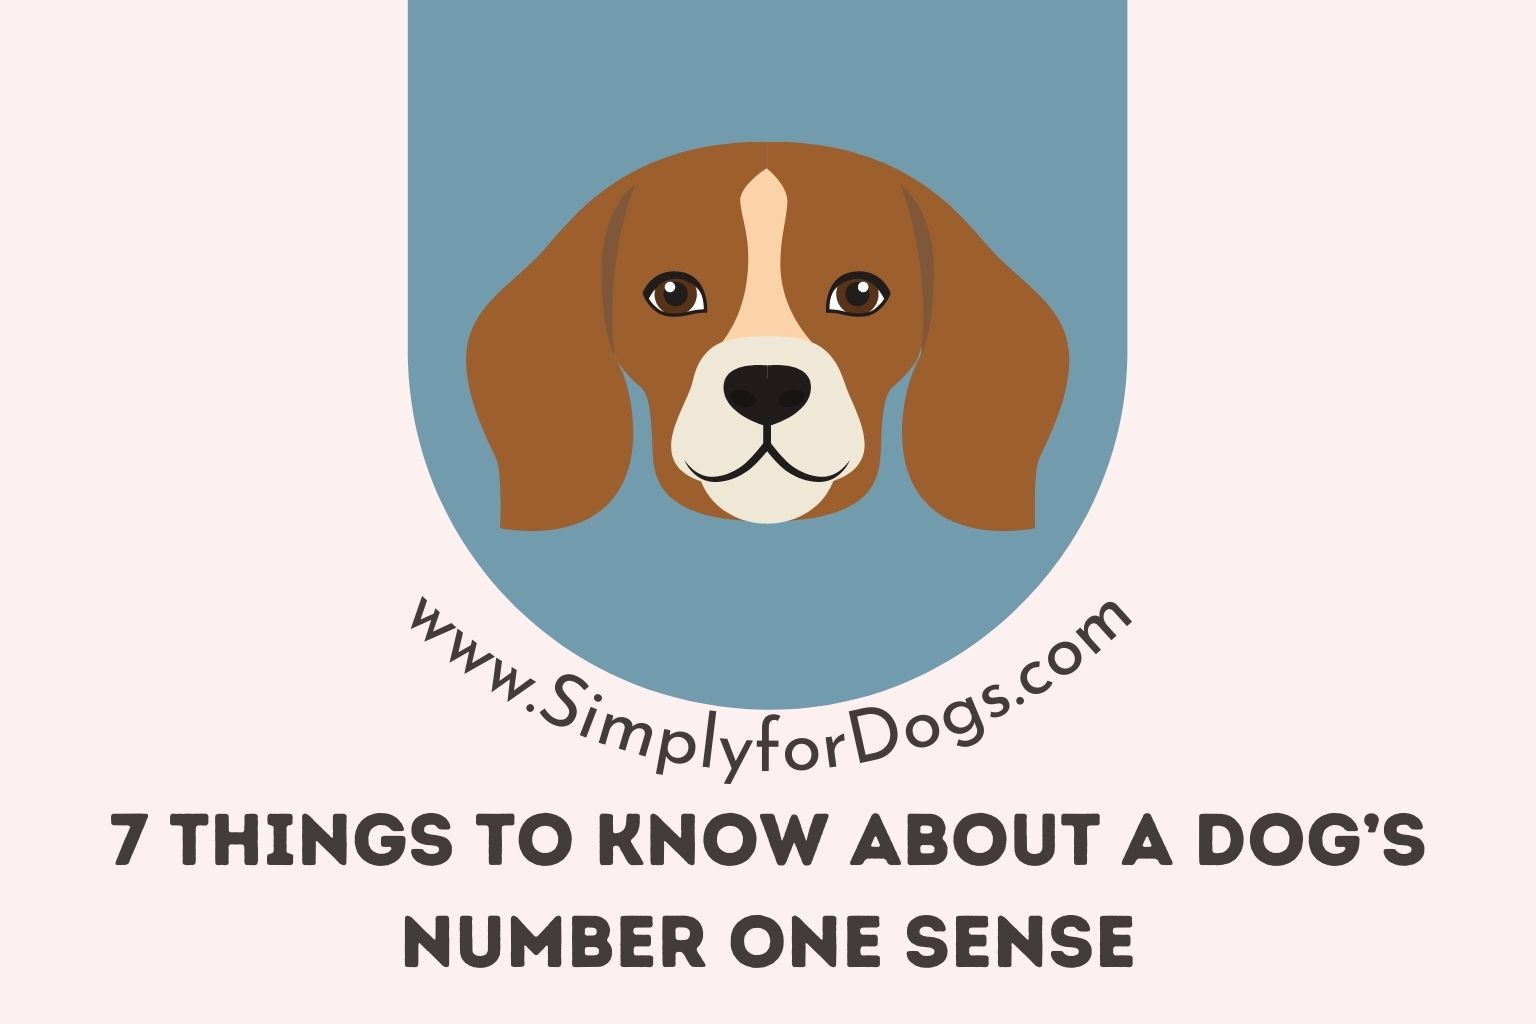 7 Things to Know About a Dog’s Number One Sense